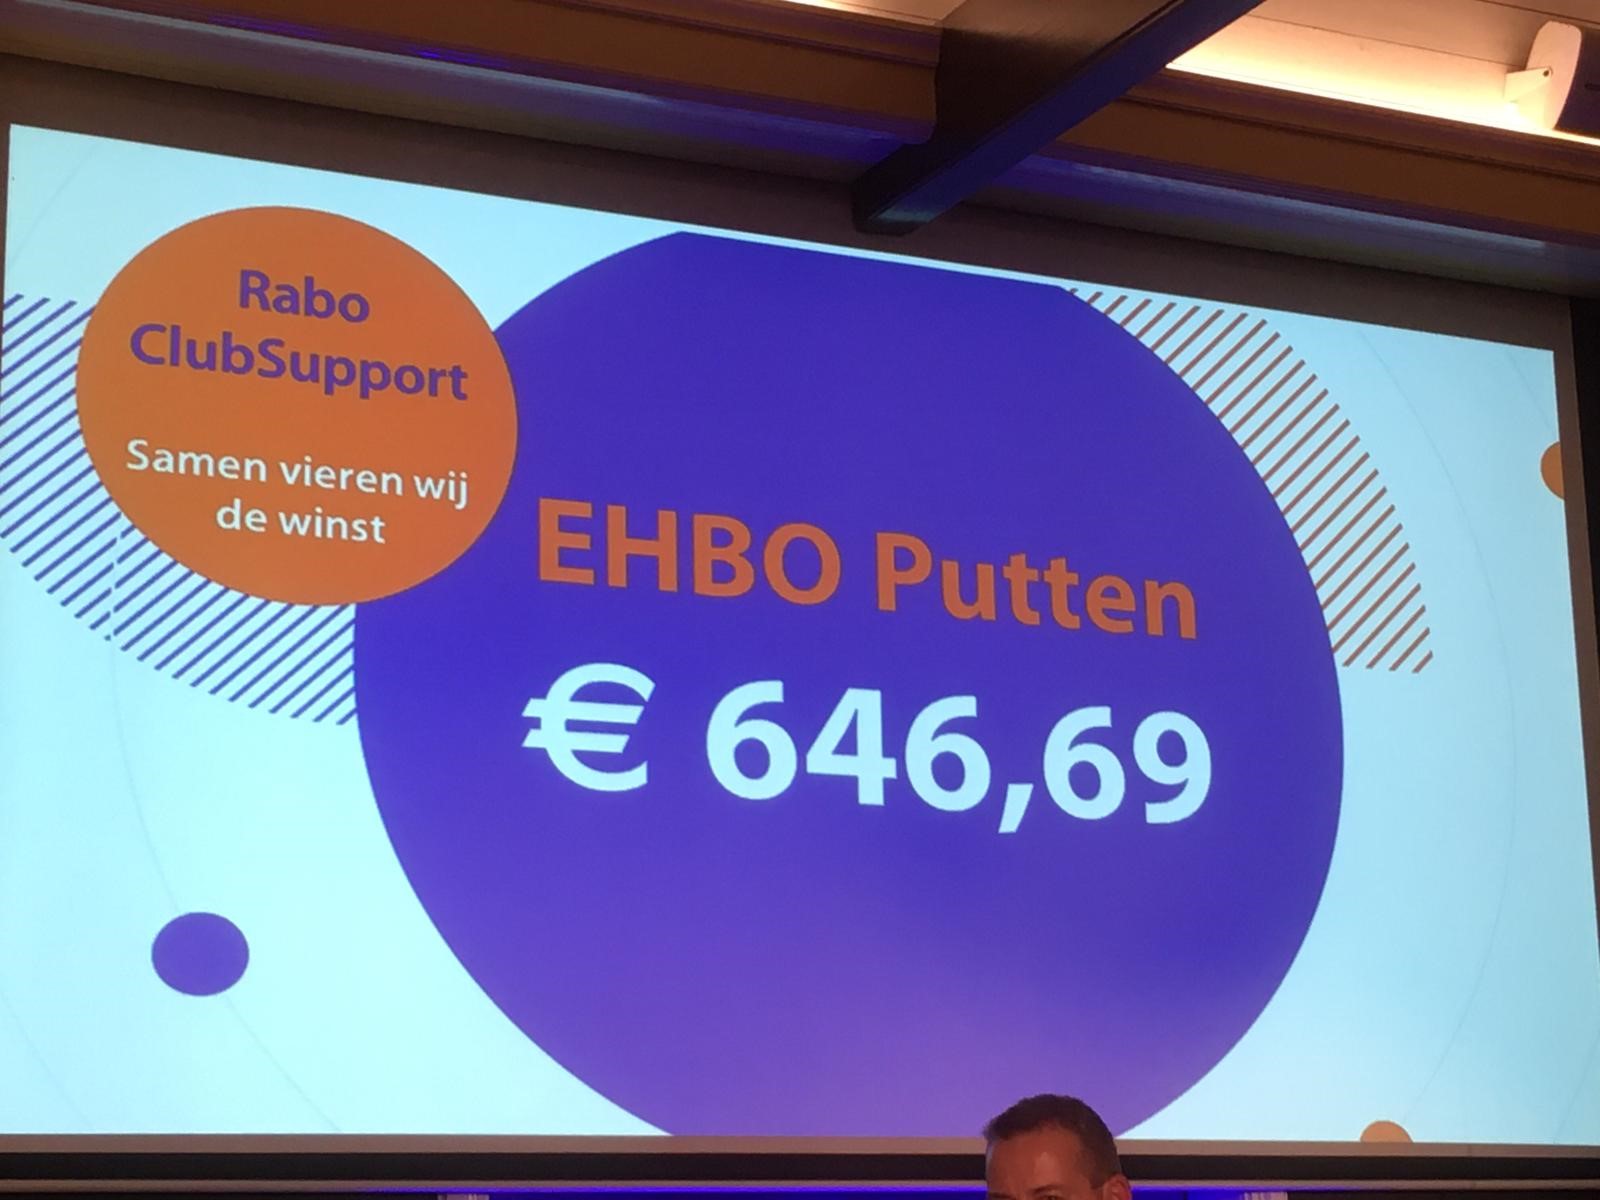 rabo clubsupport